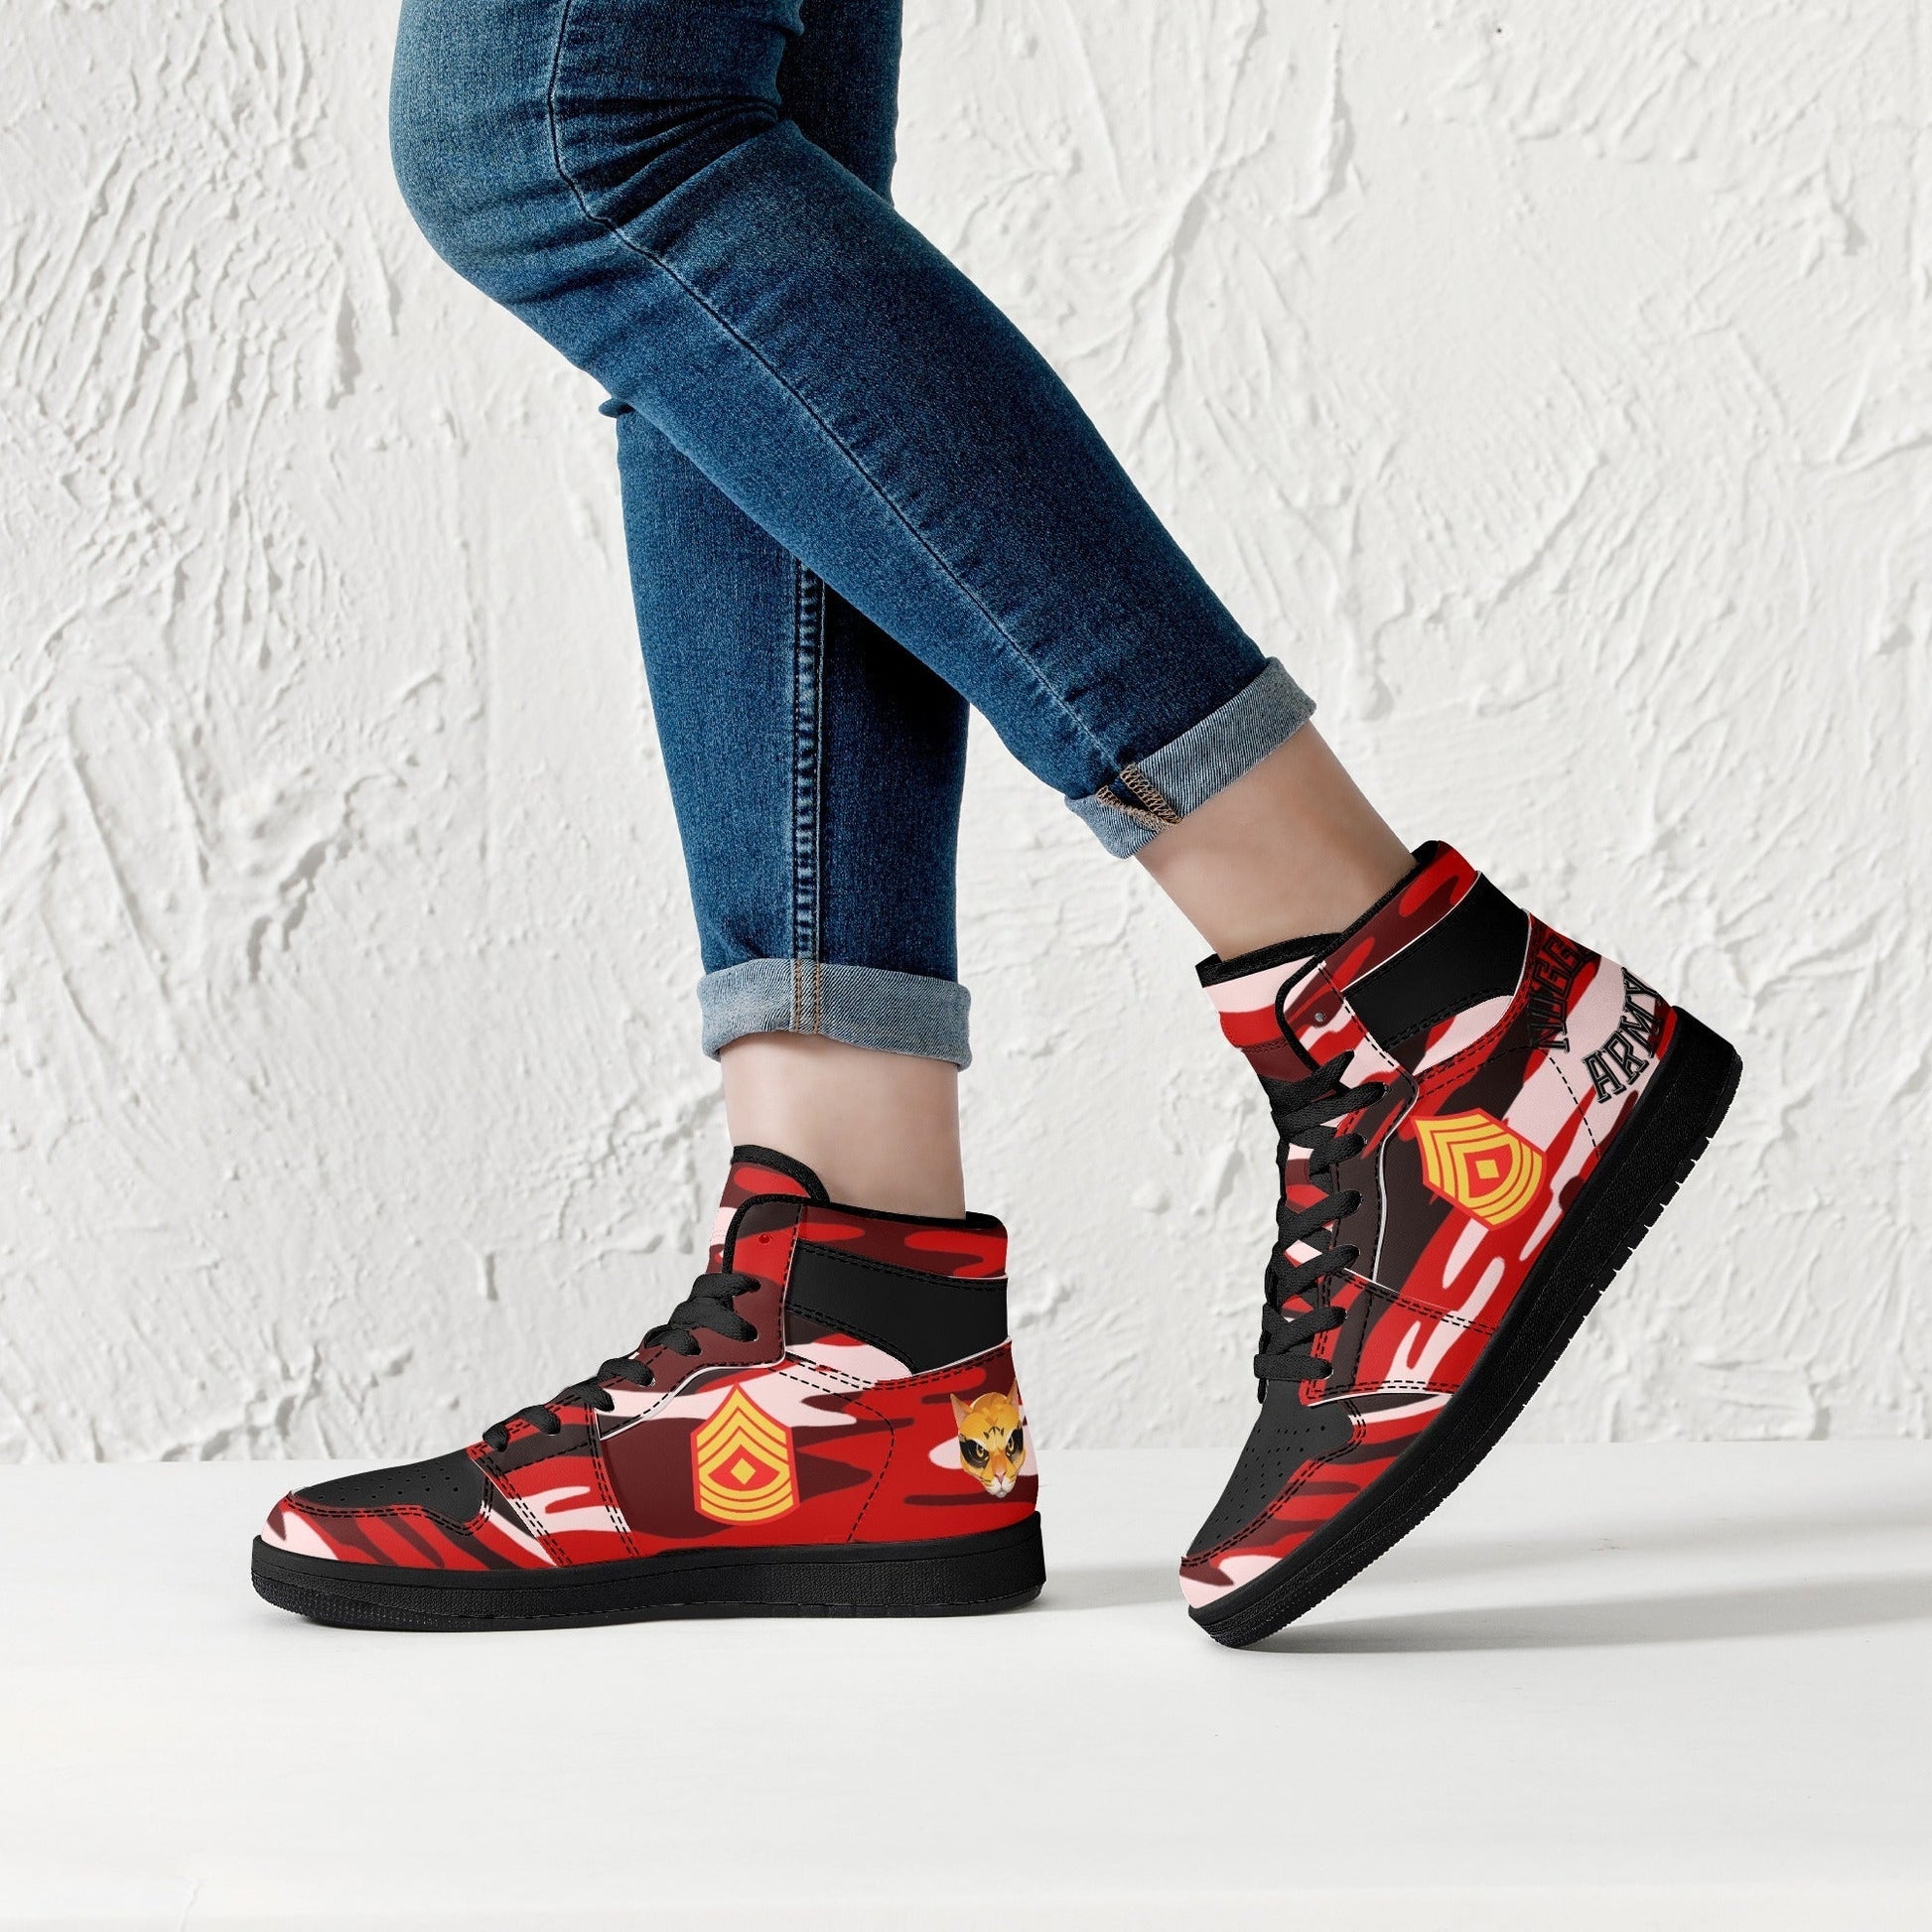 Stand out  with the  Nugget Army Womens Black High Top Leather Sneakers  available at Hey Nugget. Grab yours today!